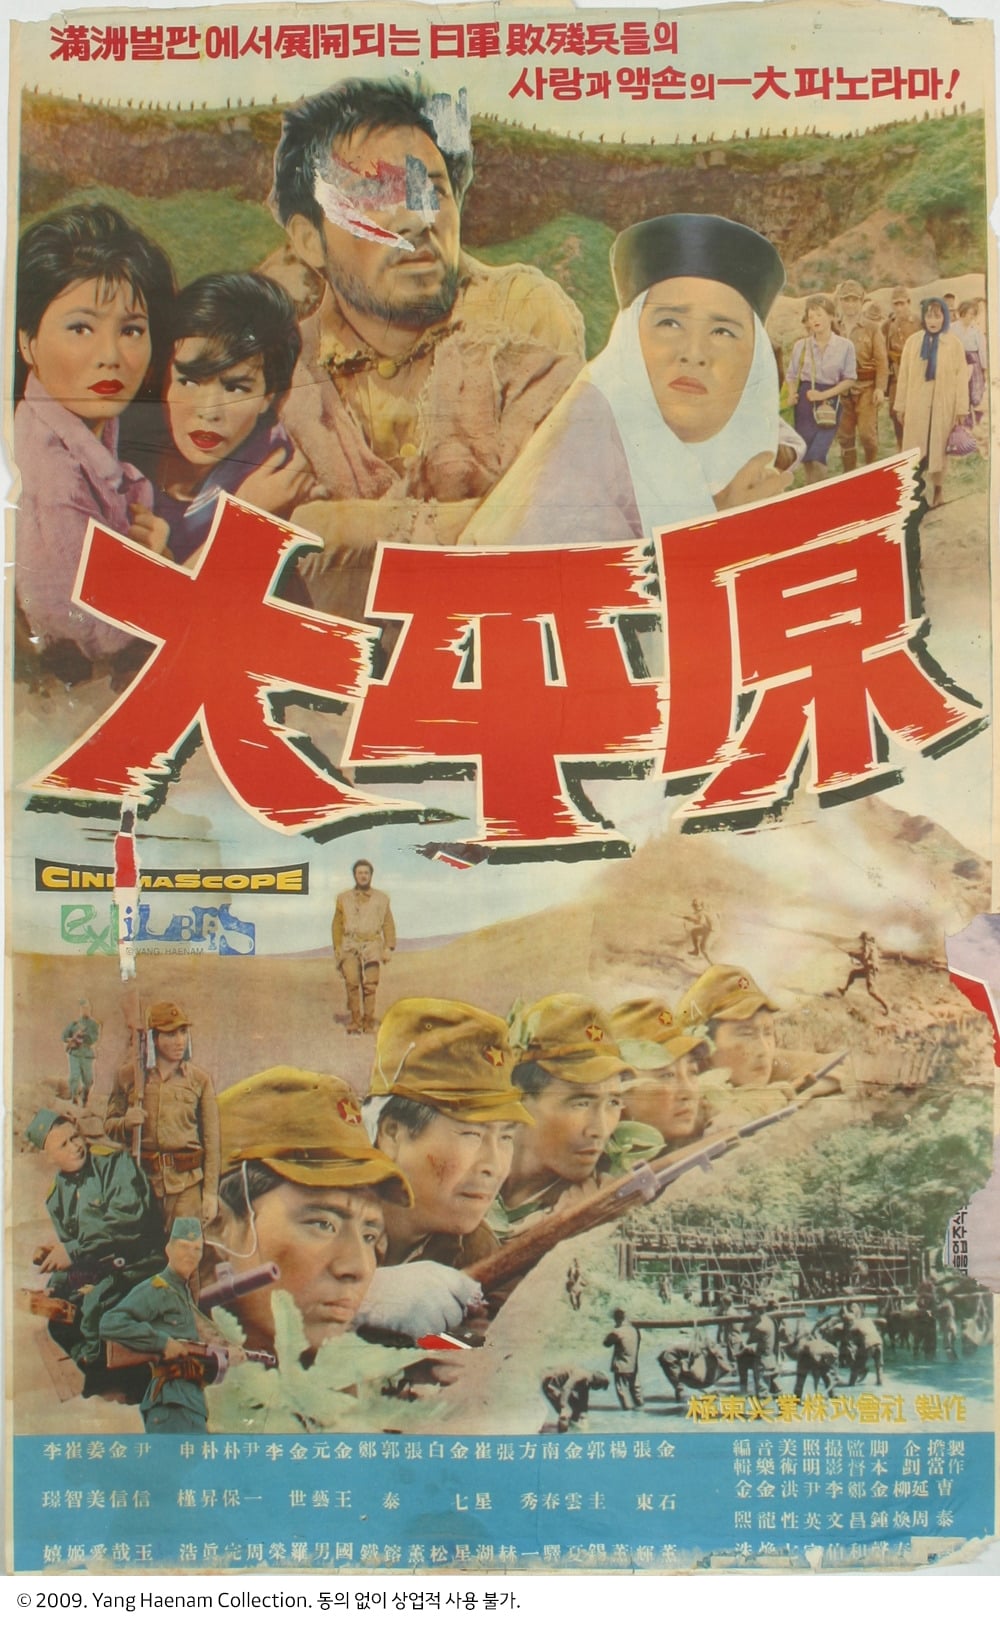 The Great Plain (1963)